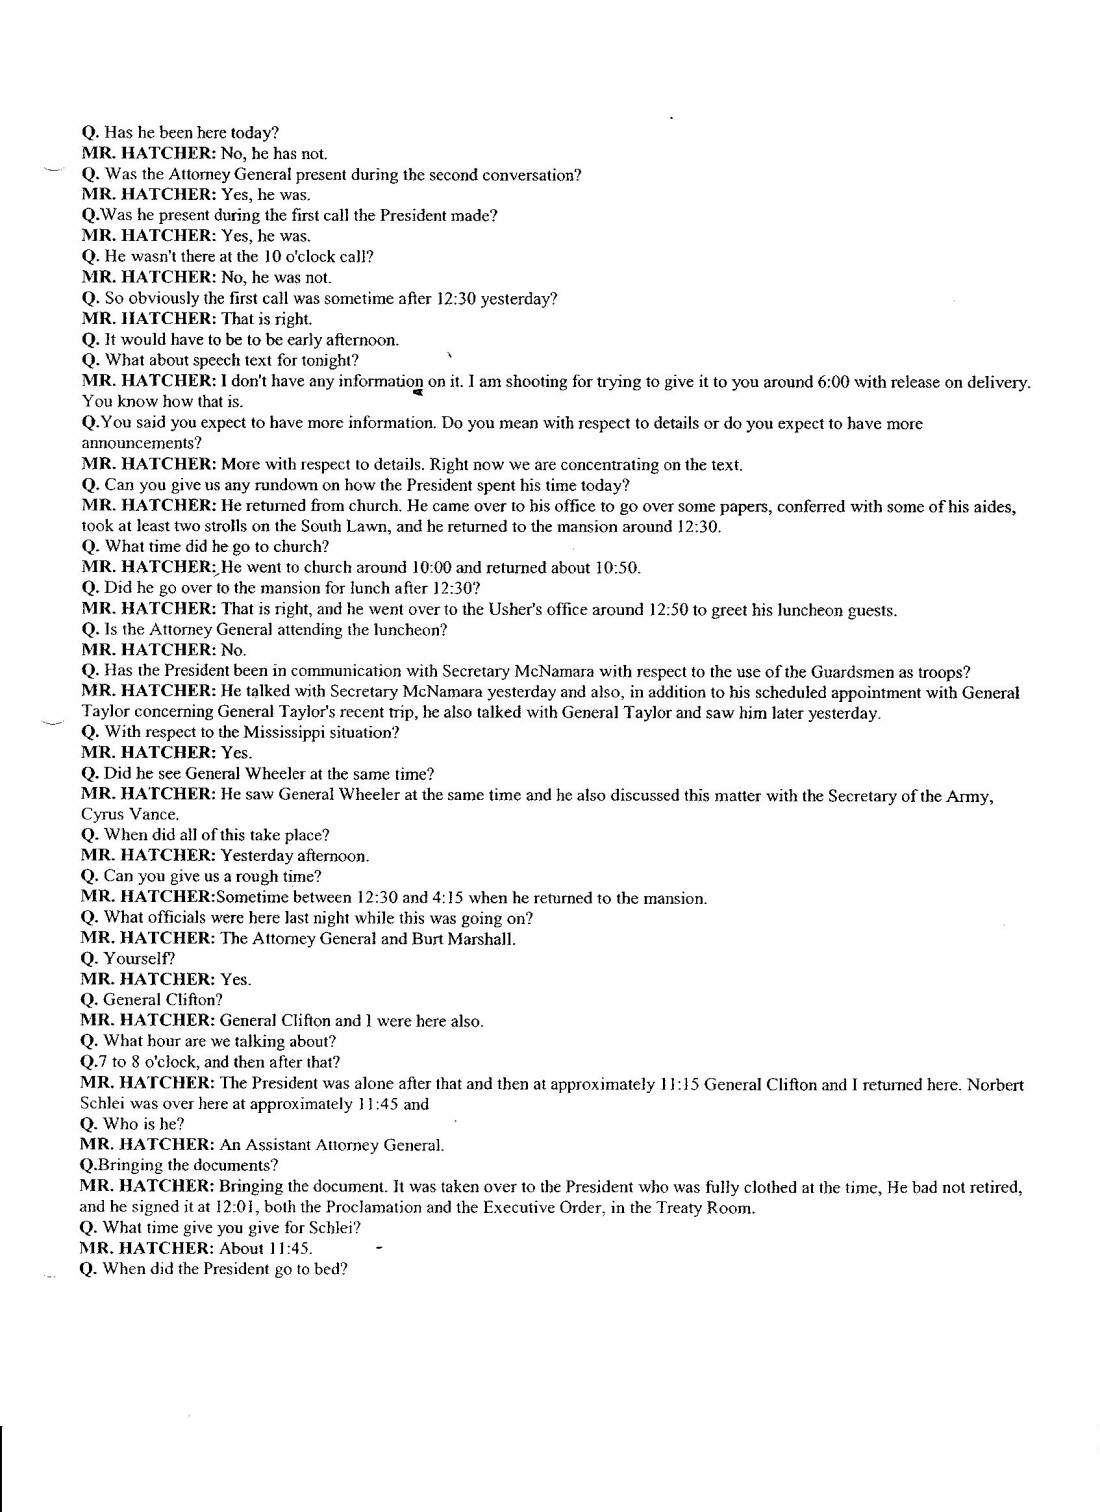 Transcript of News Conference page 3